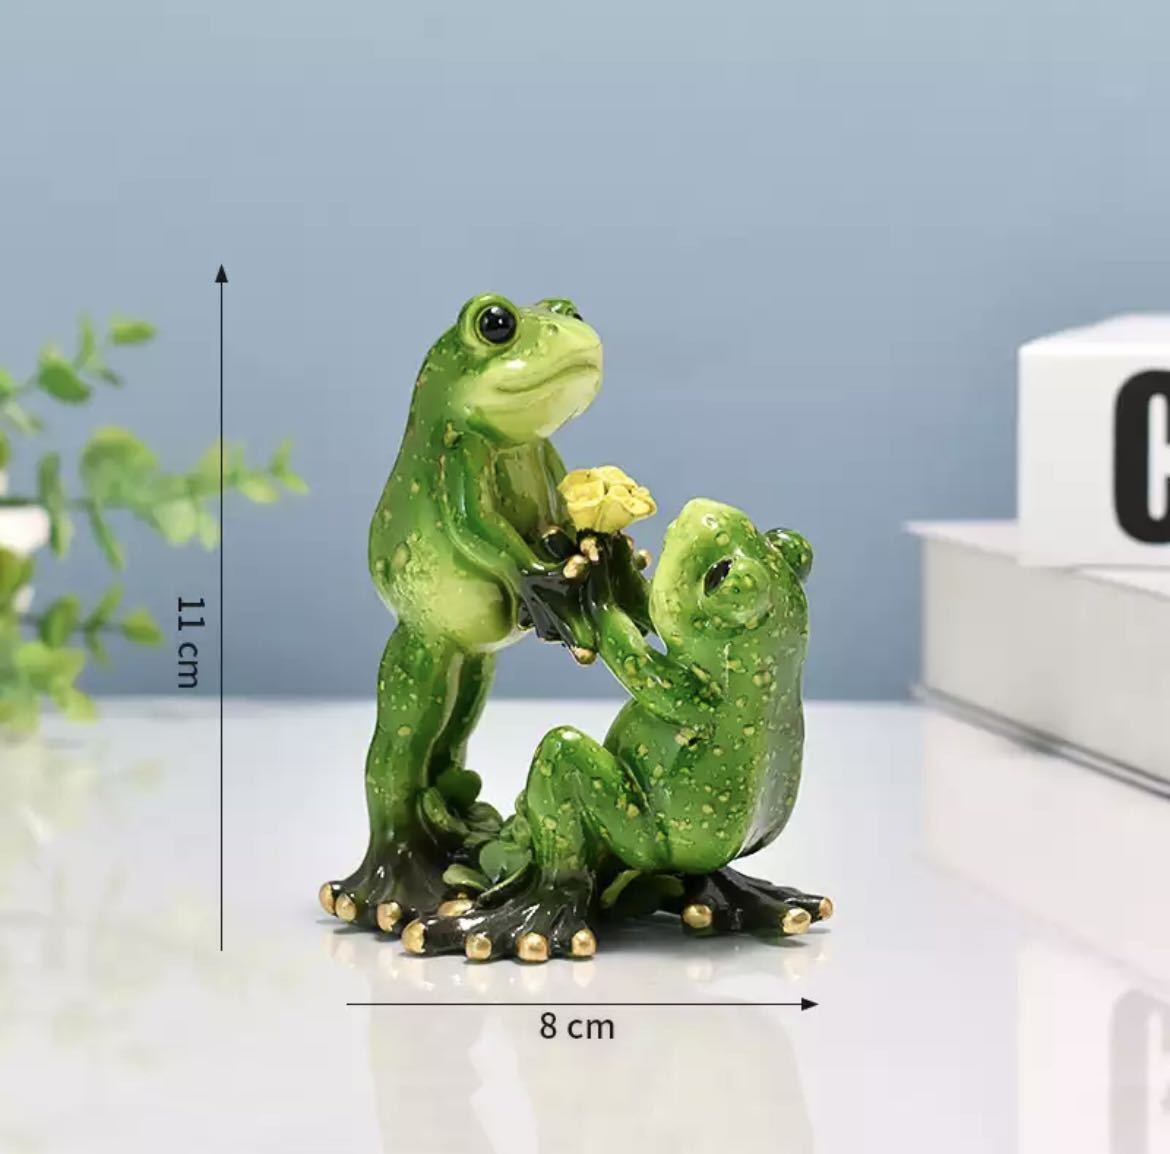 Frog Proposal Figure Frog Frog Figure Ornament Interior Goods Figurine Object Small Item Decoration Proposal 1557, Handmade items, interior, miscellaneous goods, ornament, object